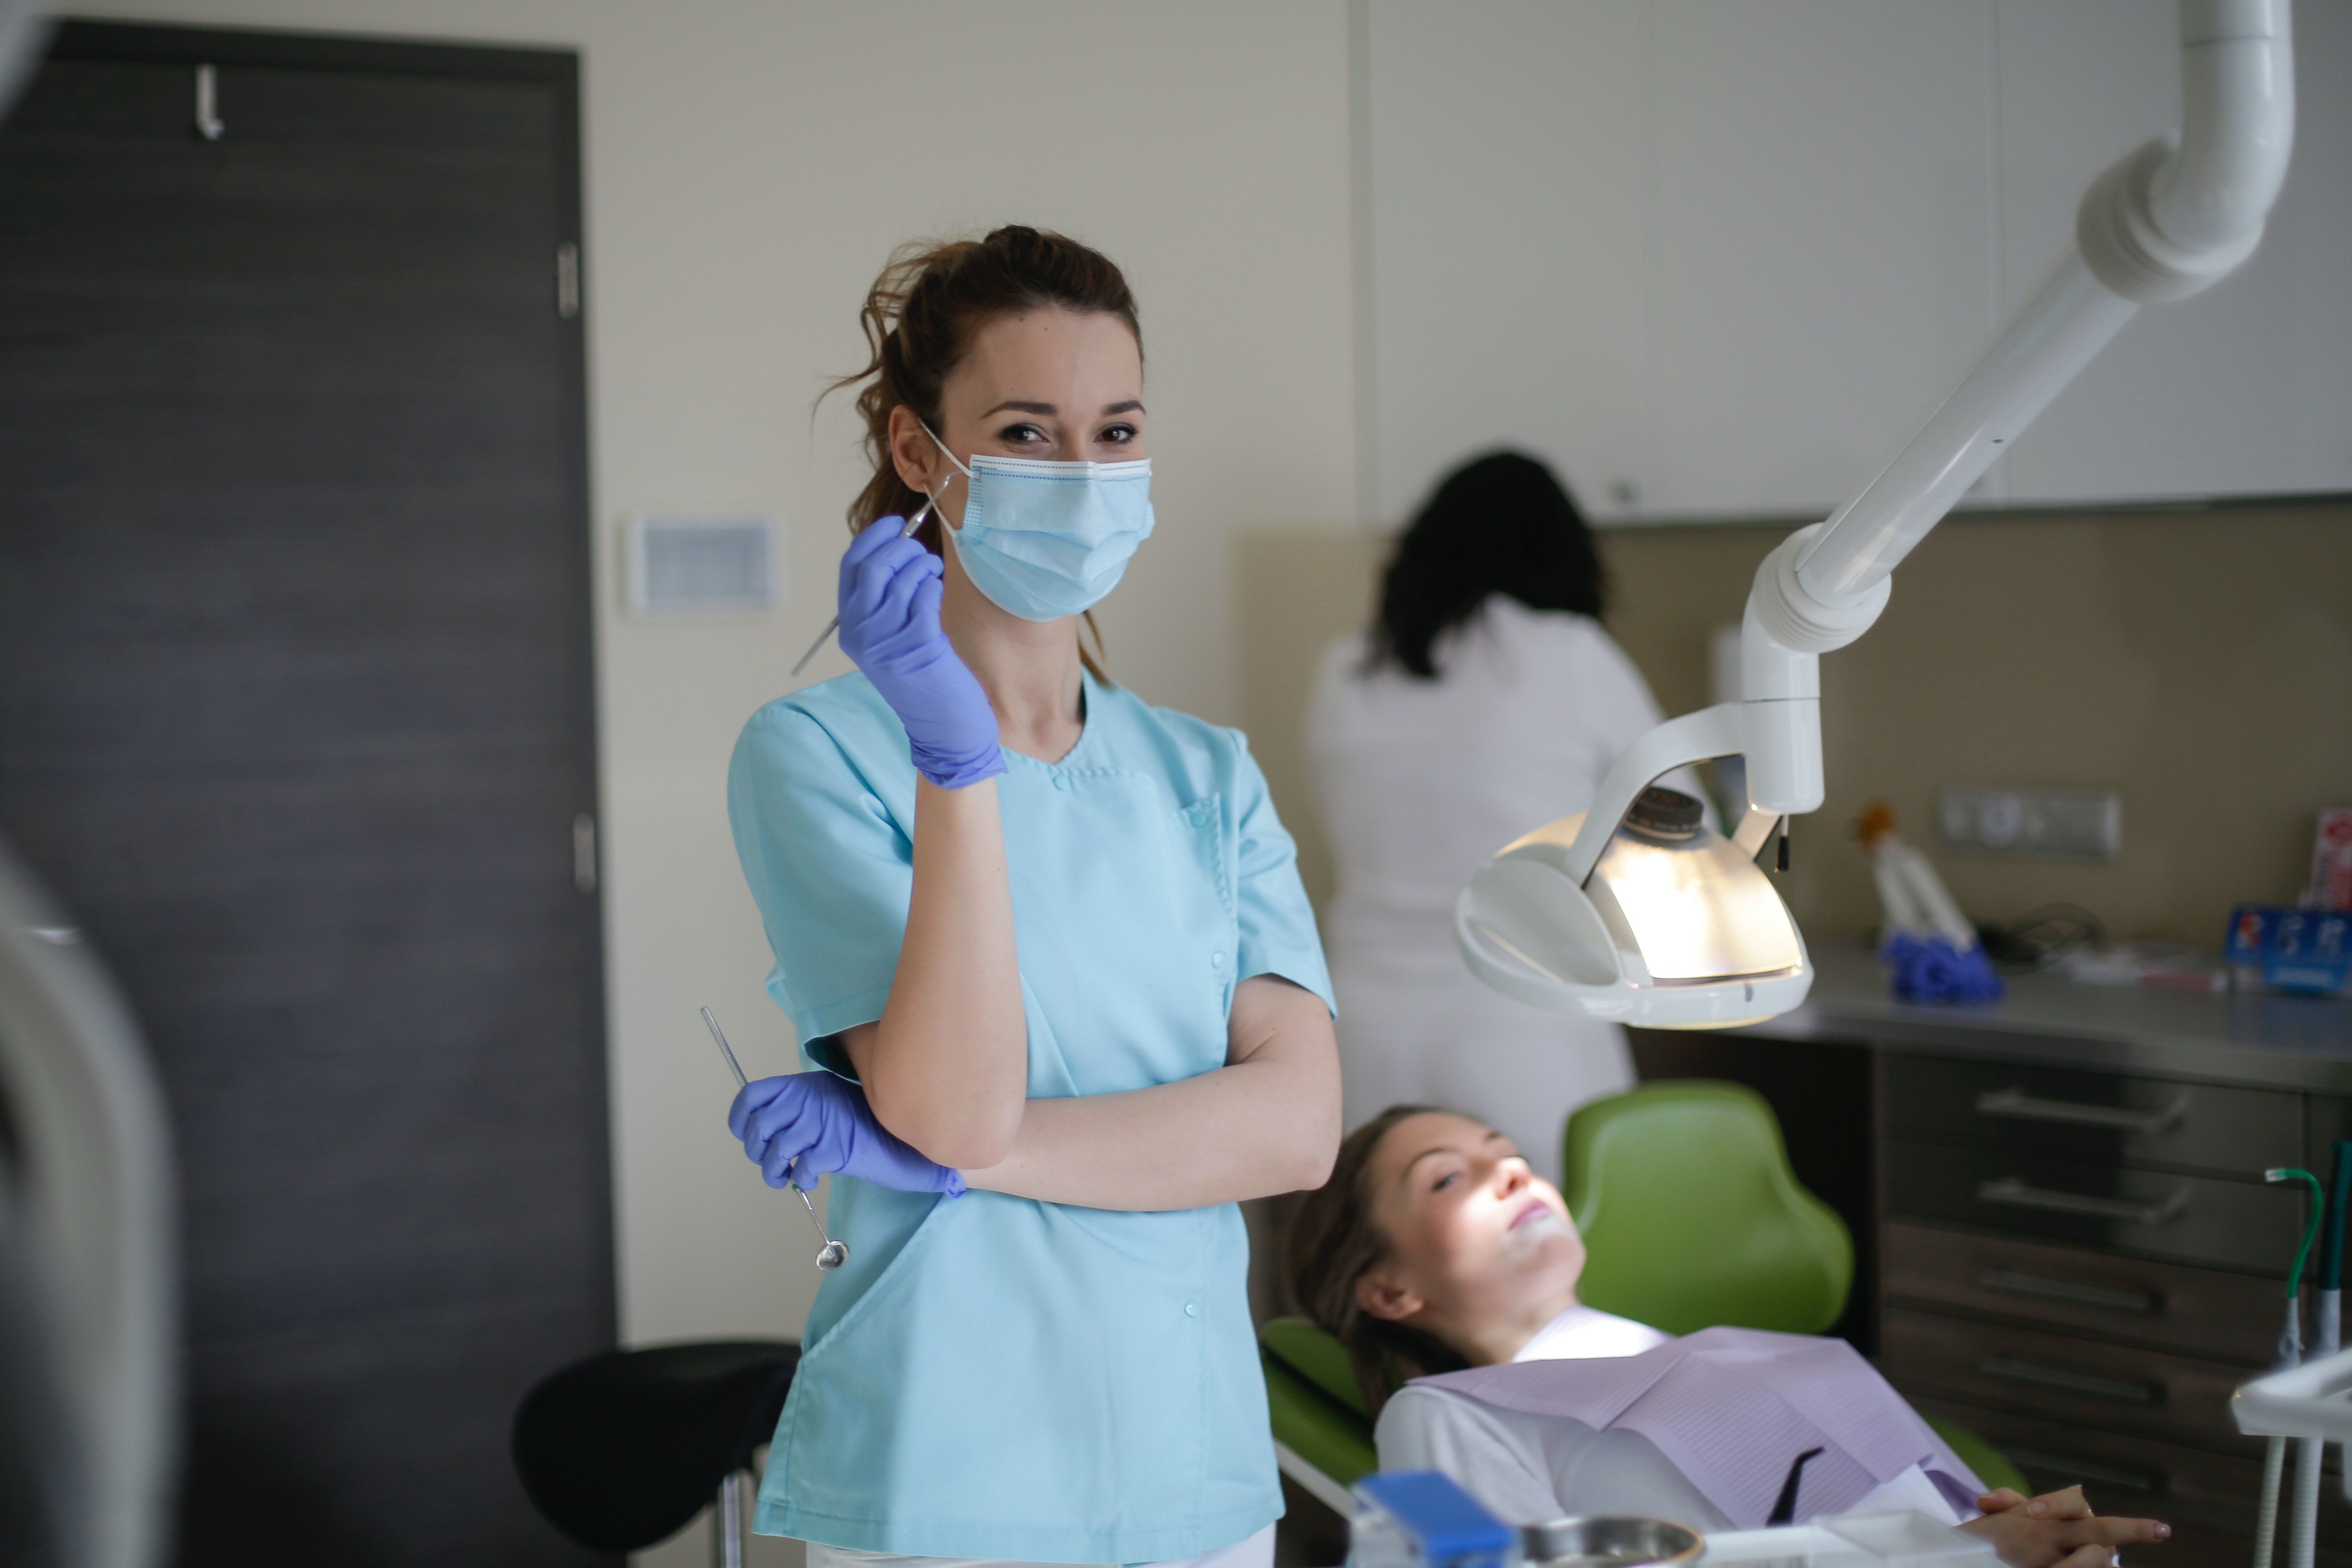 How to become a dental assistant in 2021 and beyond